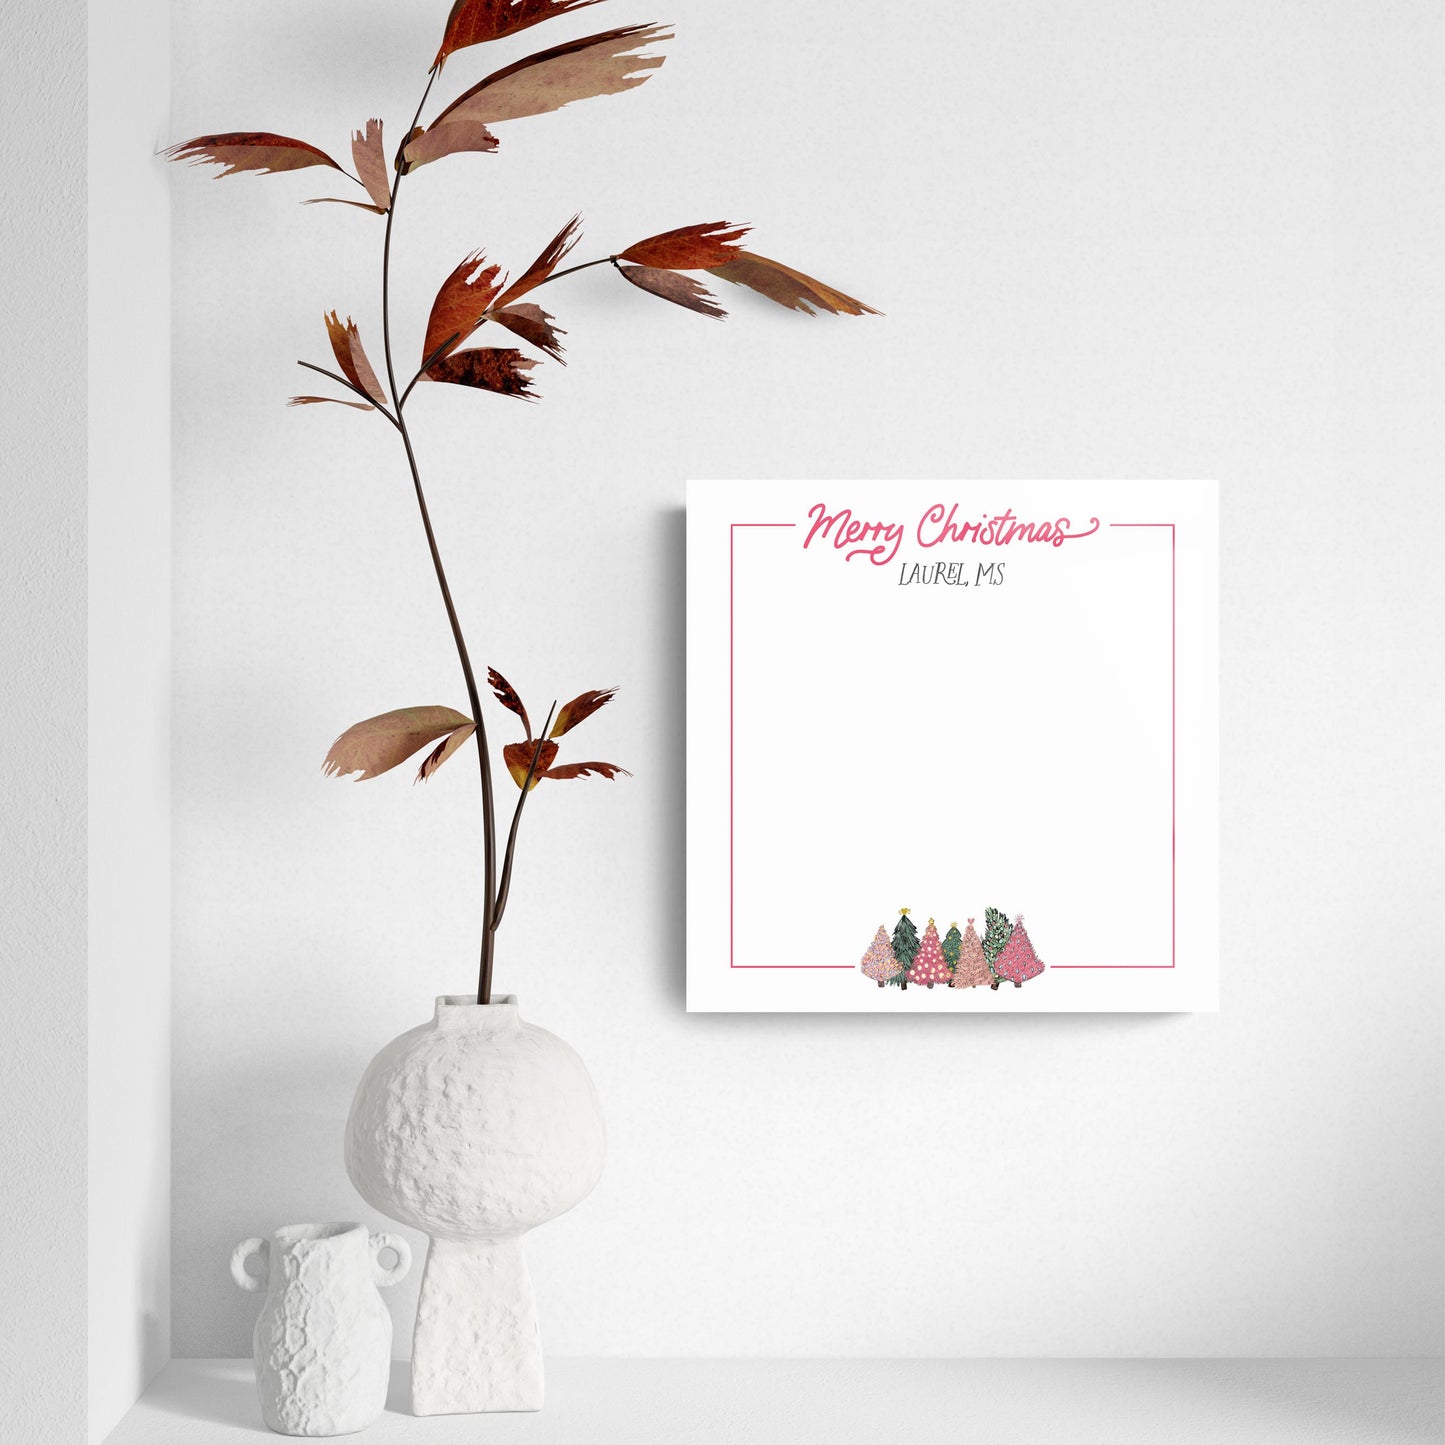 Love+Local 8x8 Dry Erase | Pink Christmas Trees